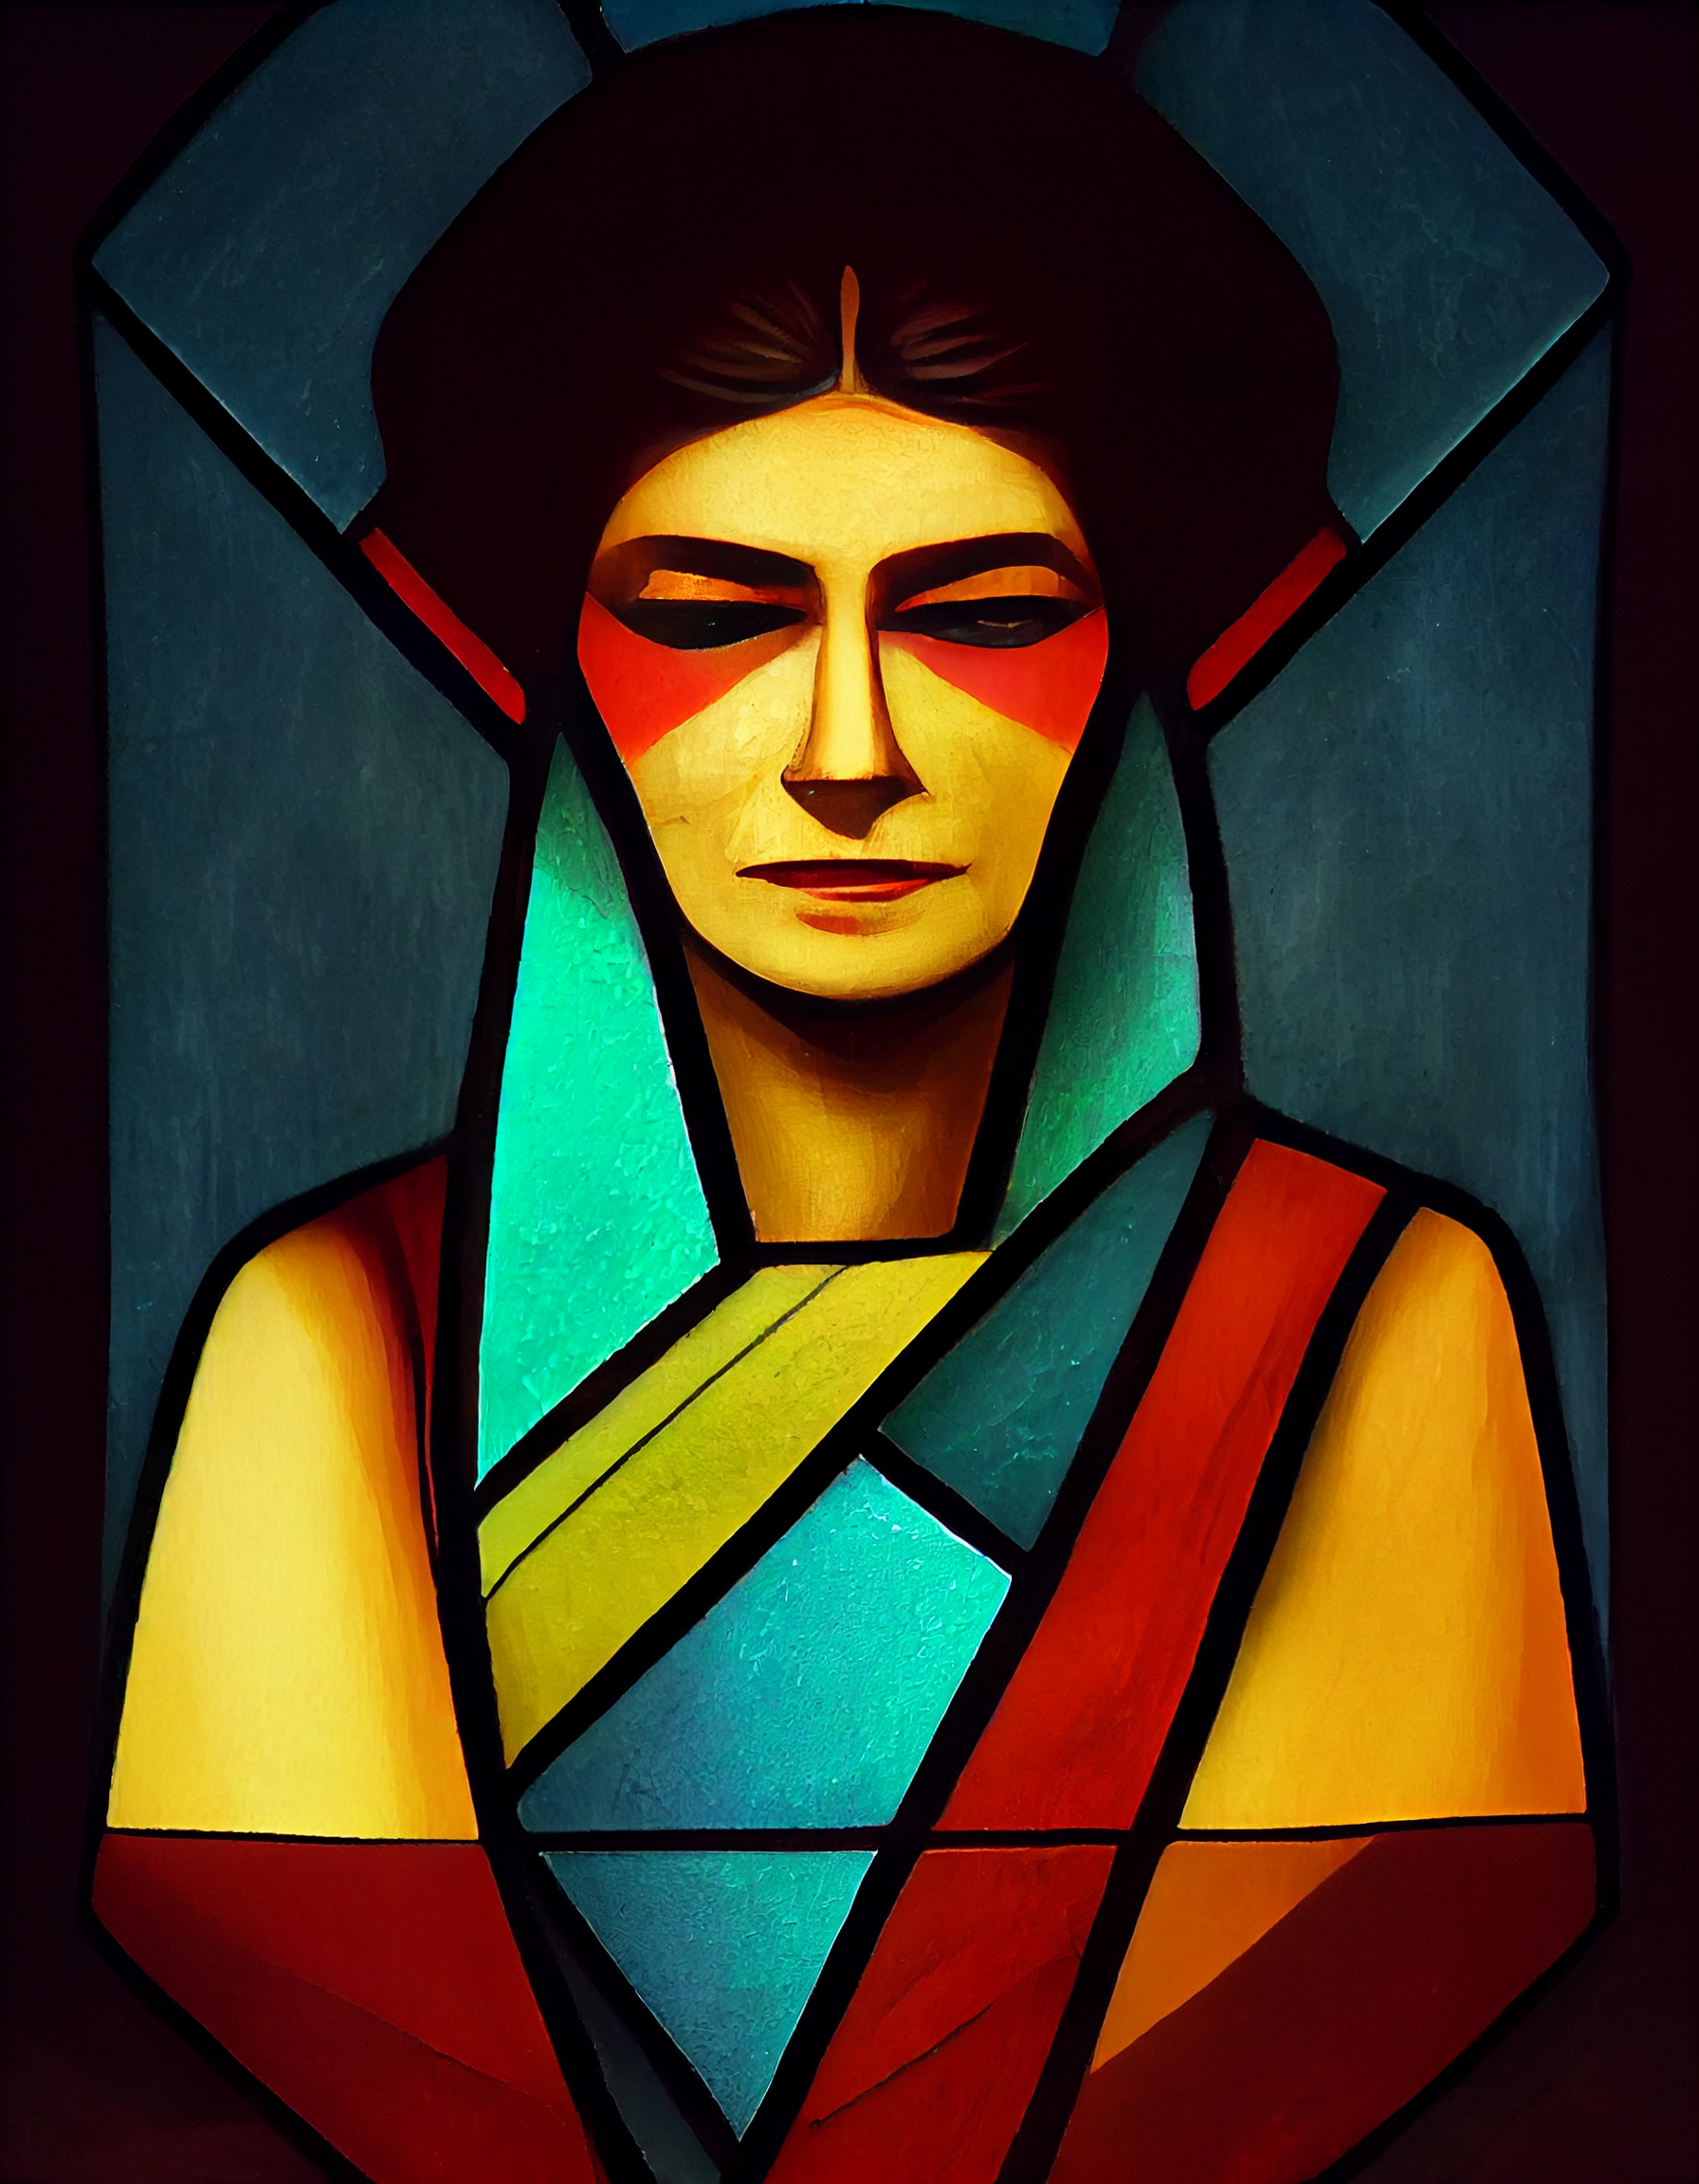 Stained Glass image of a feminine figure